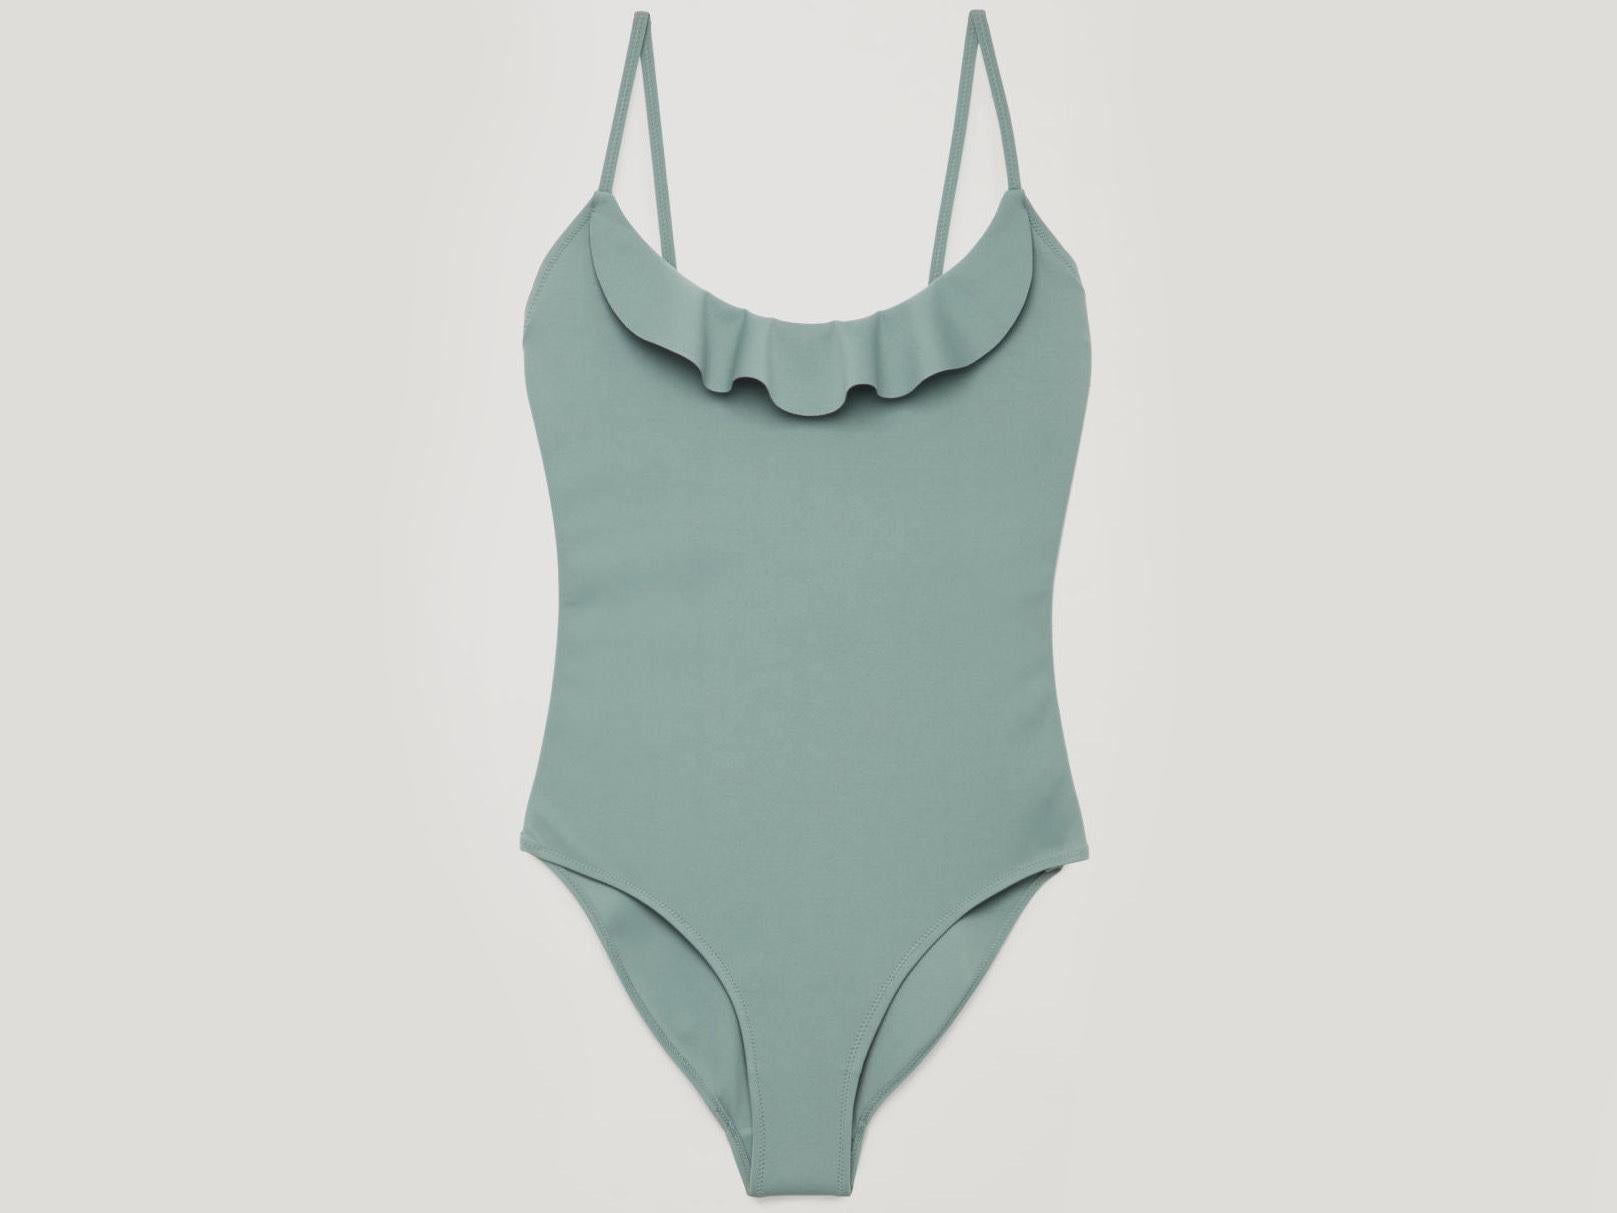 Frill Detail Swimsuit, £45, Cos